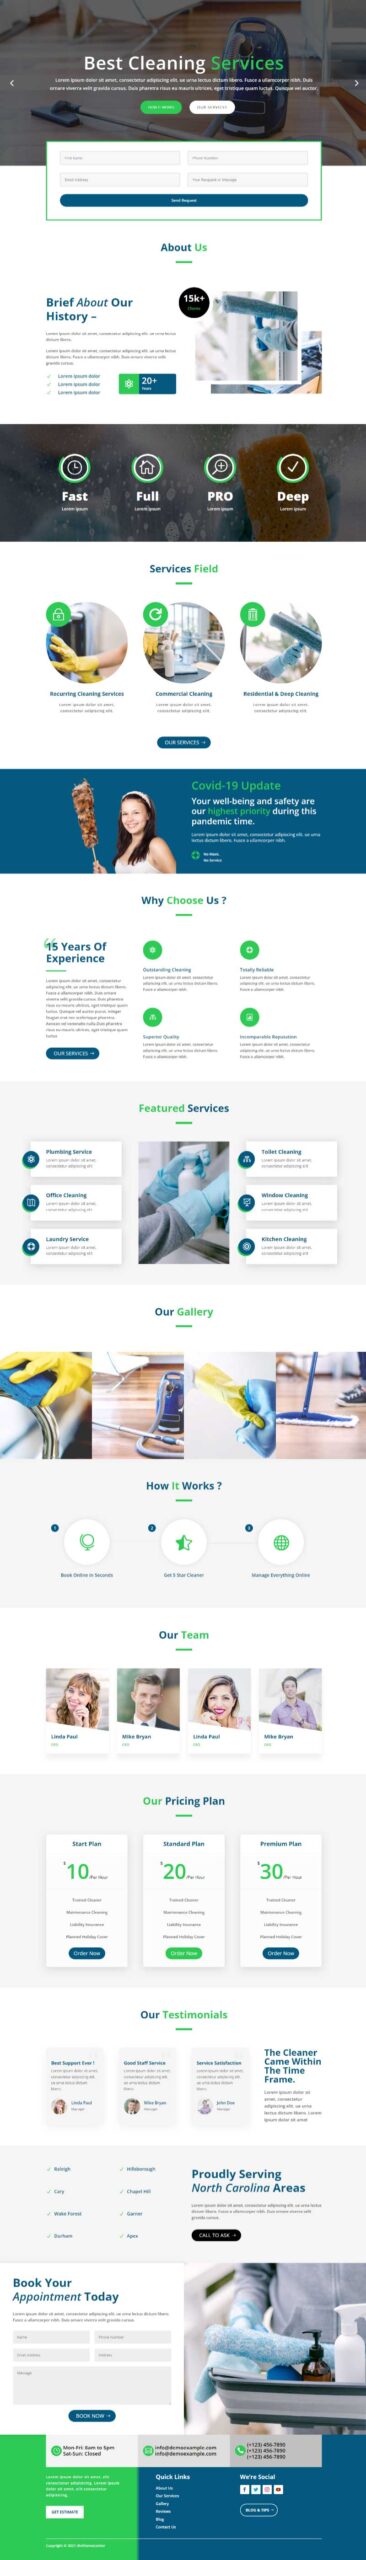 cleaning company divi layout